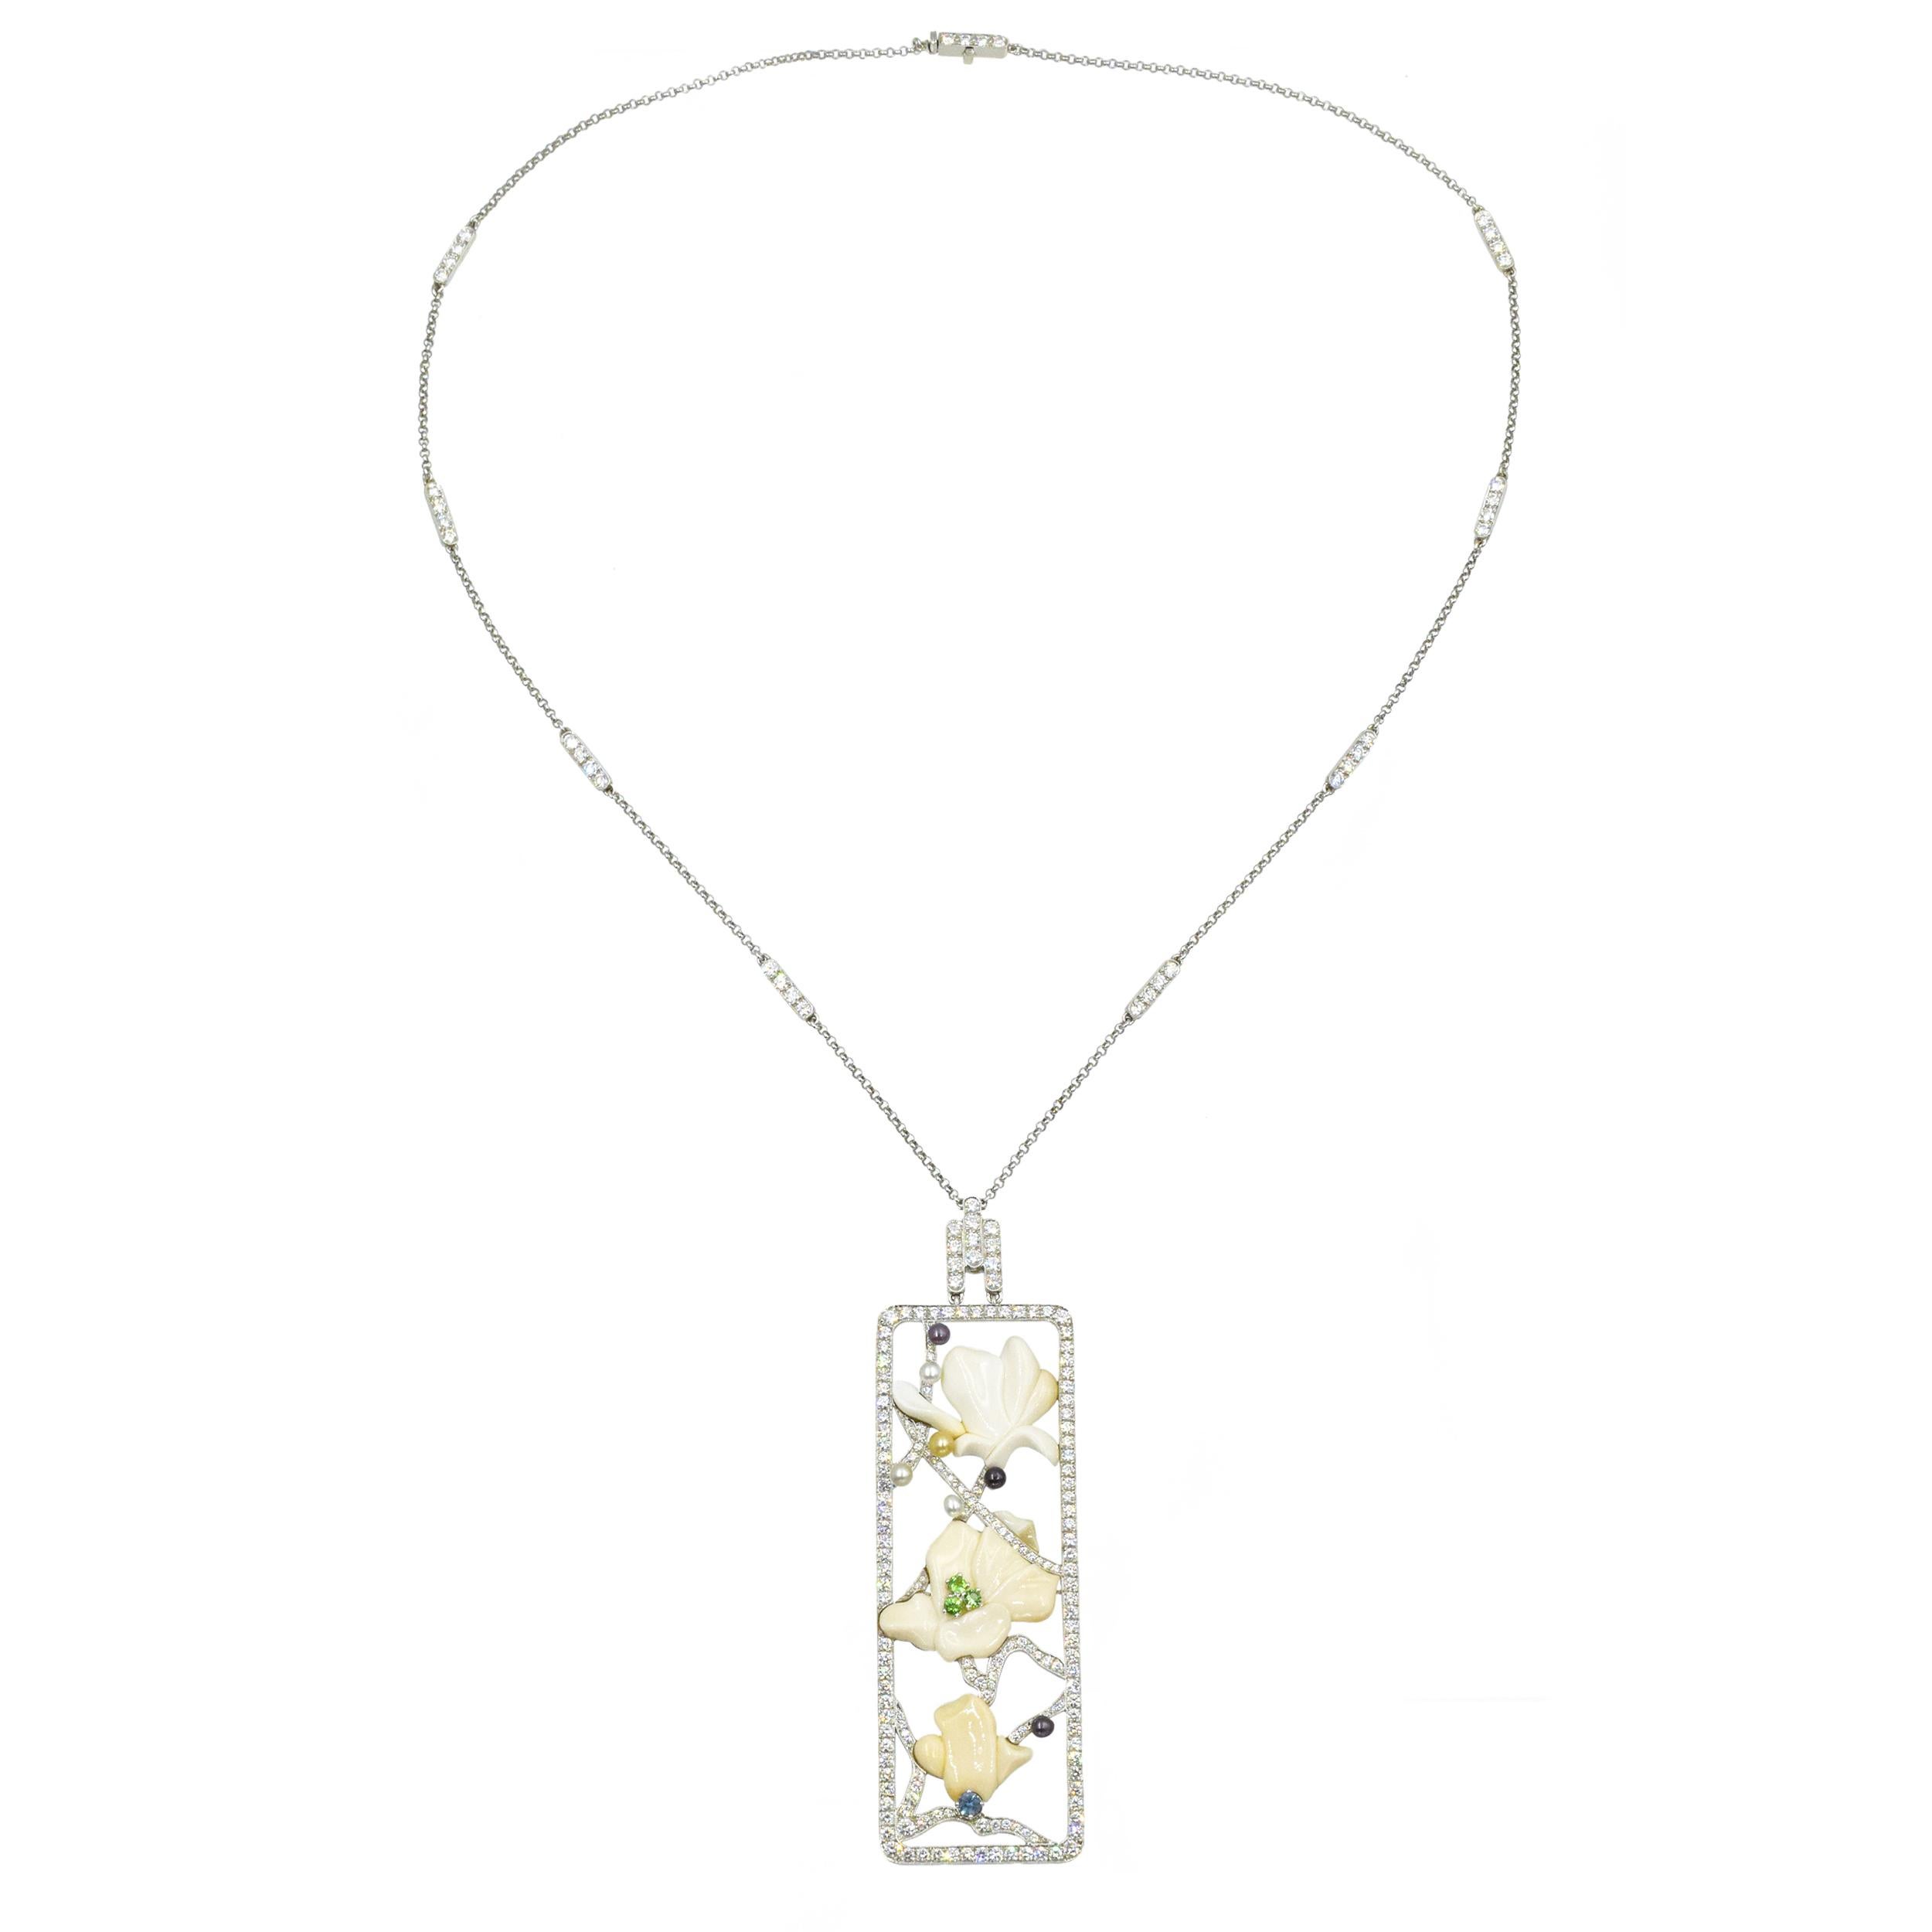 Tiffany & Co. Diamond And Multi-Gem 'Magnolia' Pendant Necklace In Platinum. This necklace is set with 222 round brilliant cut diamonds with a total weight of approximately 3.75ct - 4.0ct, color F-G, clarity VS, tsavorite garnets, a sapphire, seed